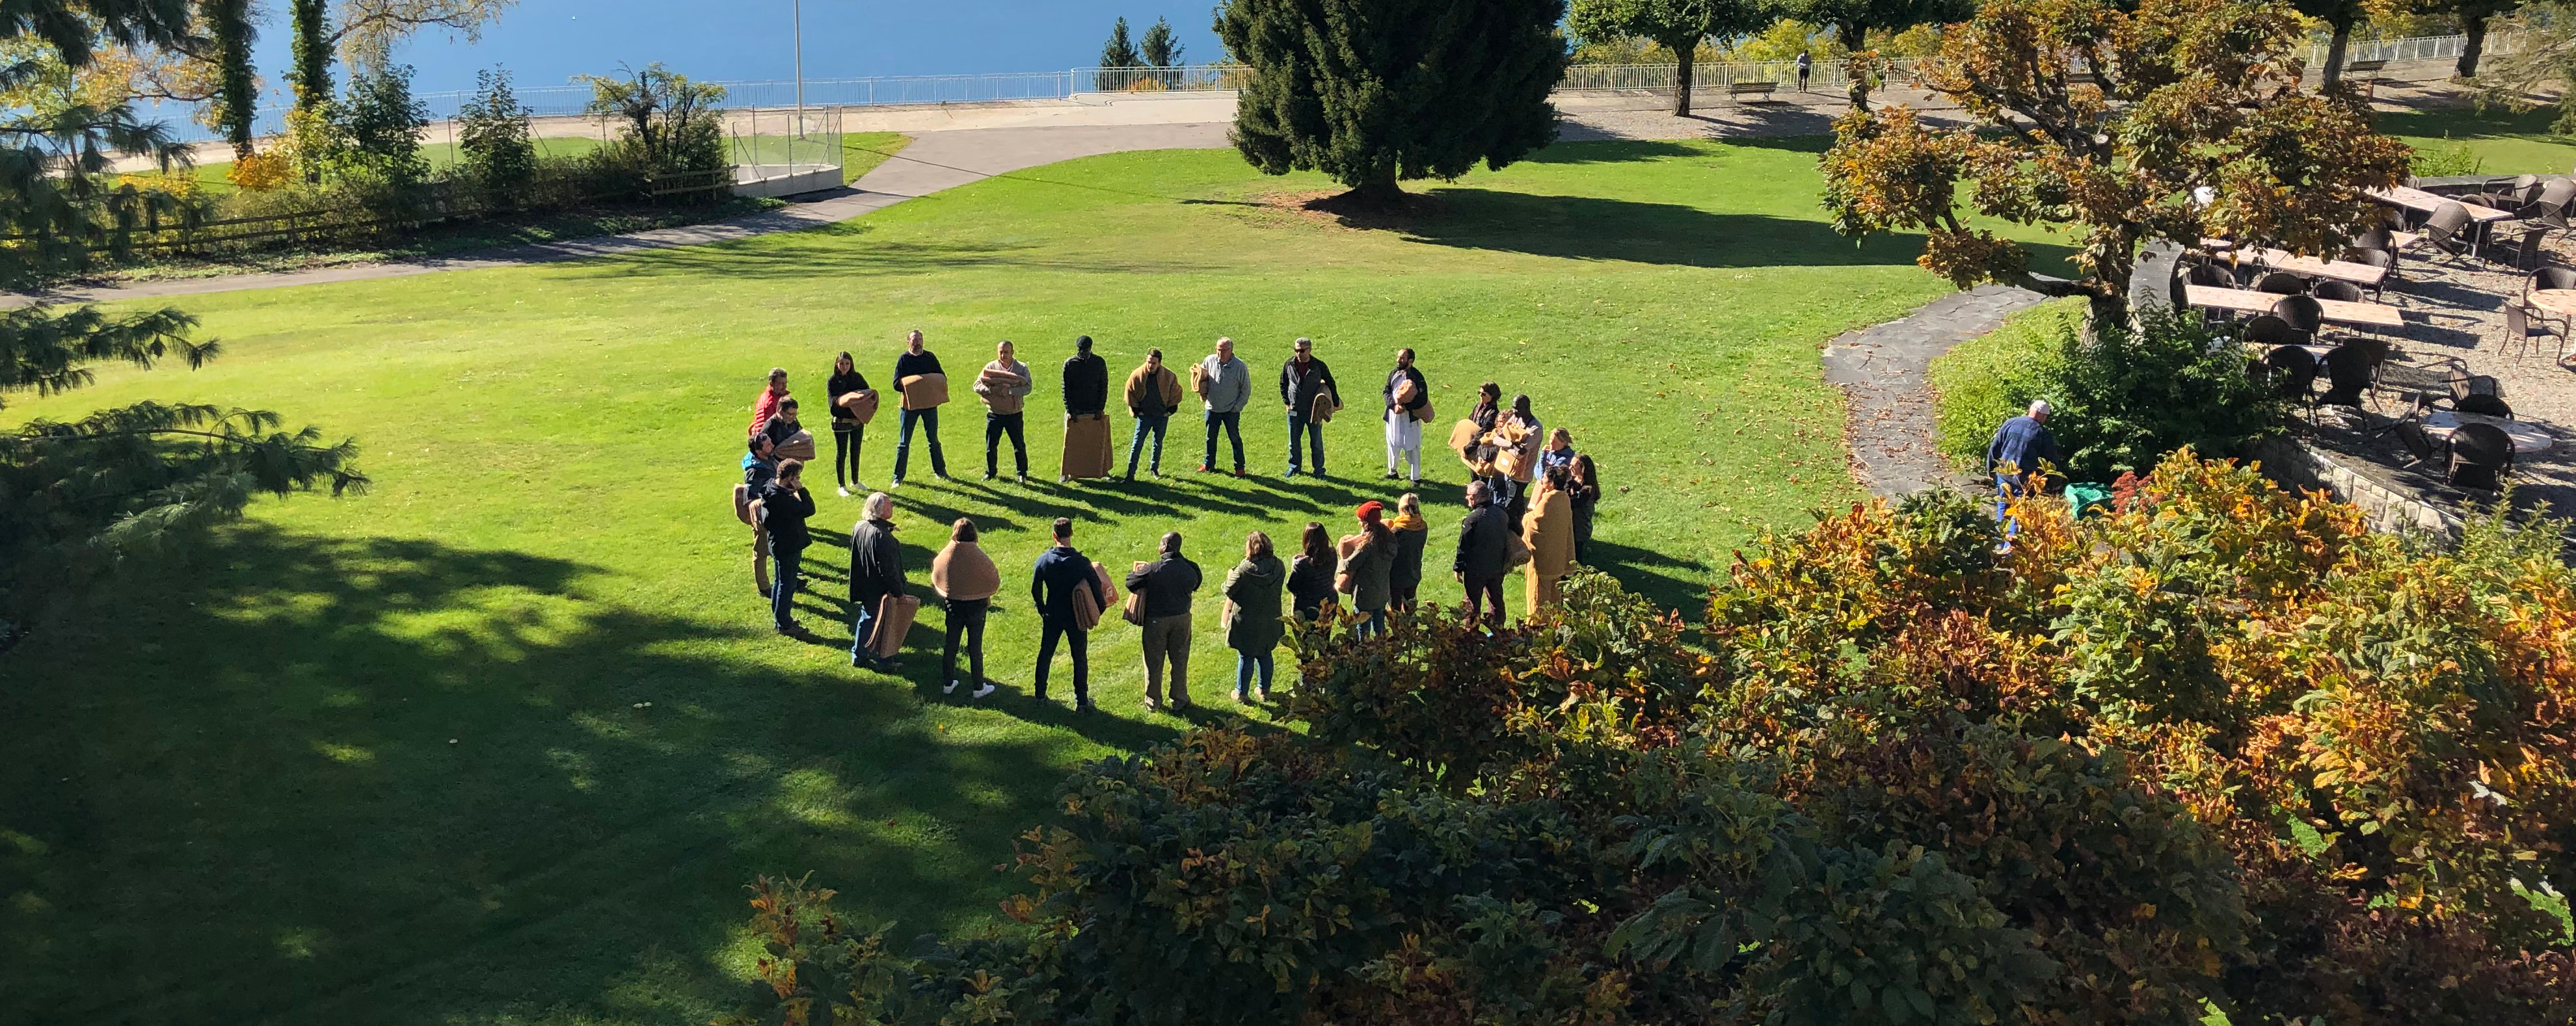 CCHN training circle outside cropped